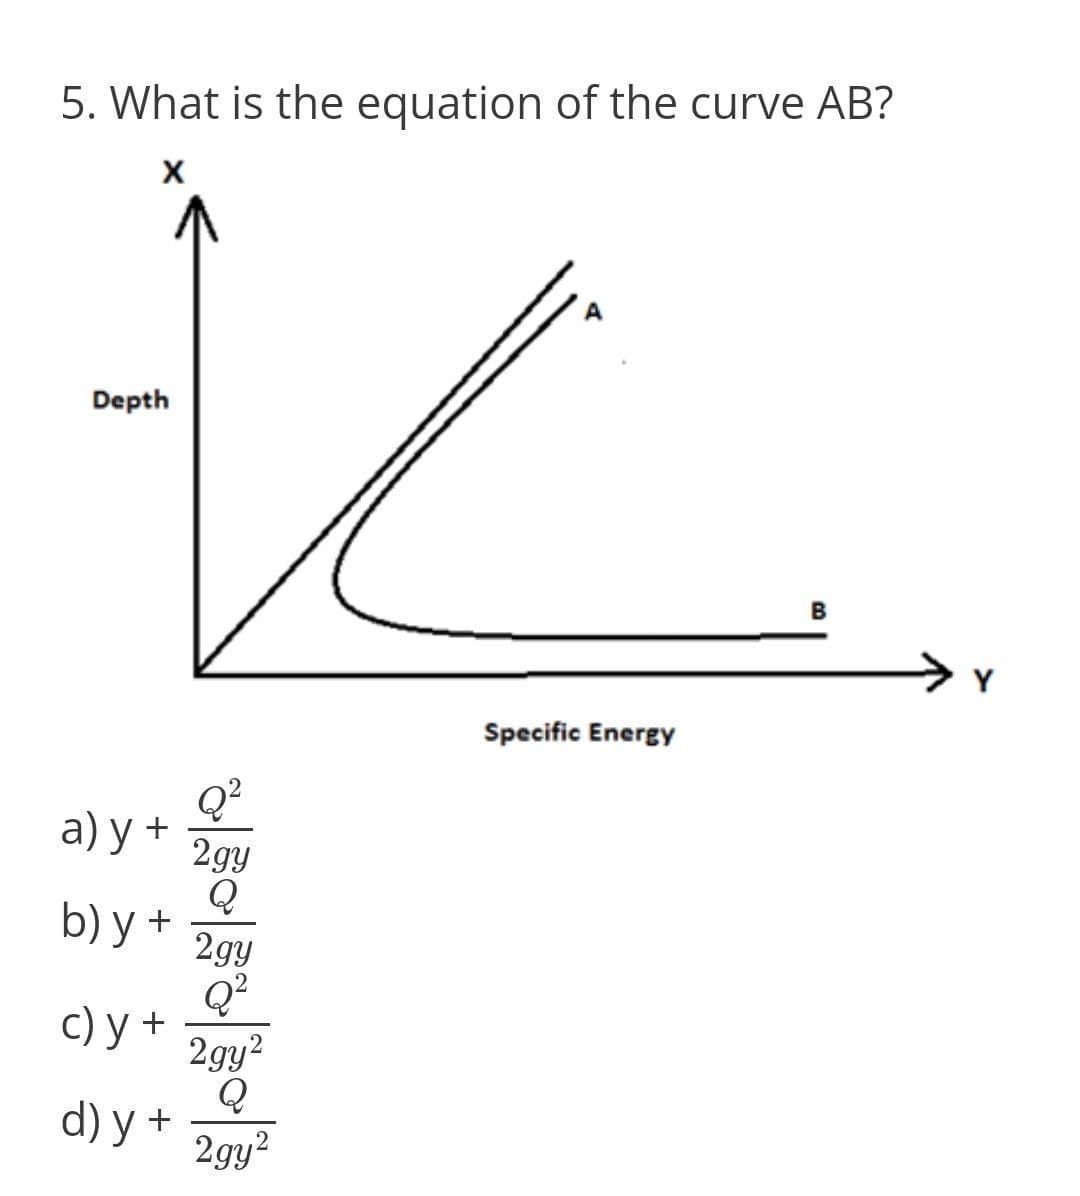 5. What is the equation of the curve AB?
X
Depth
B
Specific Energy
Q?
a) y + 2gy
Q
b) y * 2gy
Q?
c) y +
2gy2
Q
d) у +
2gy?
